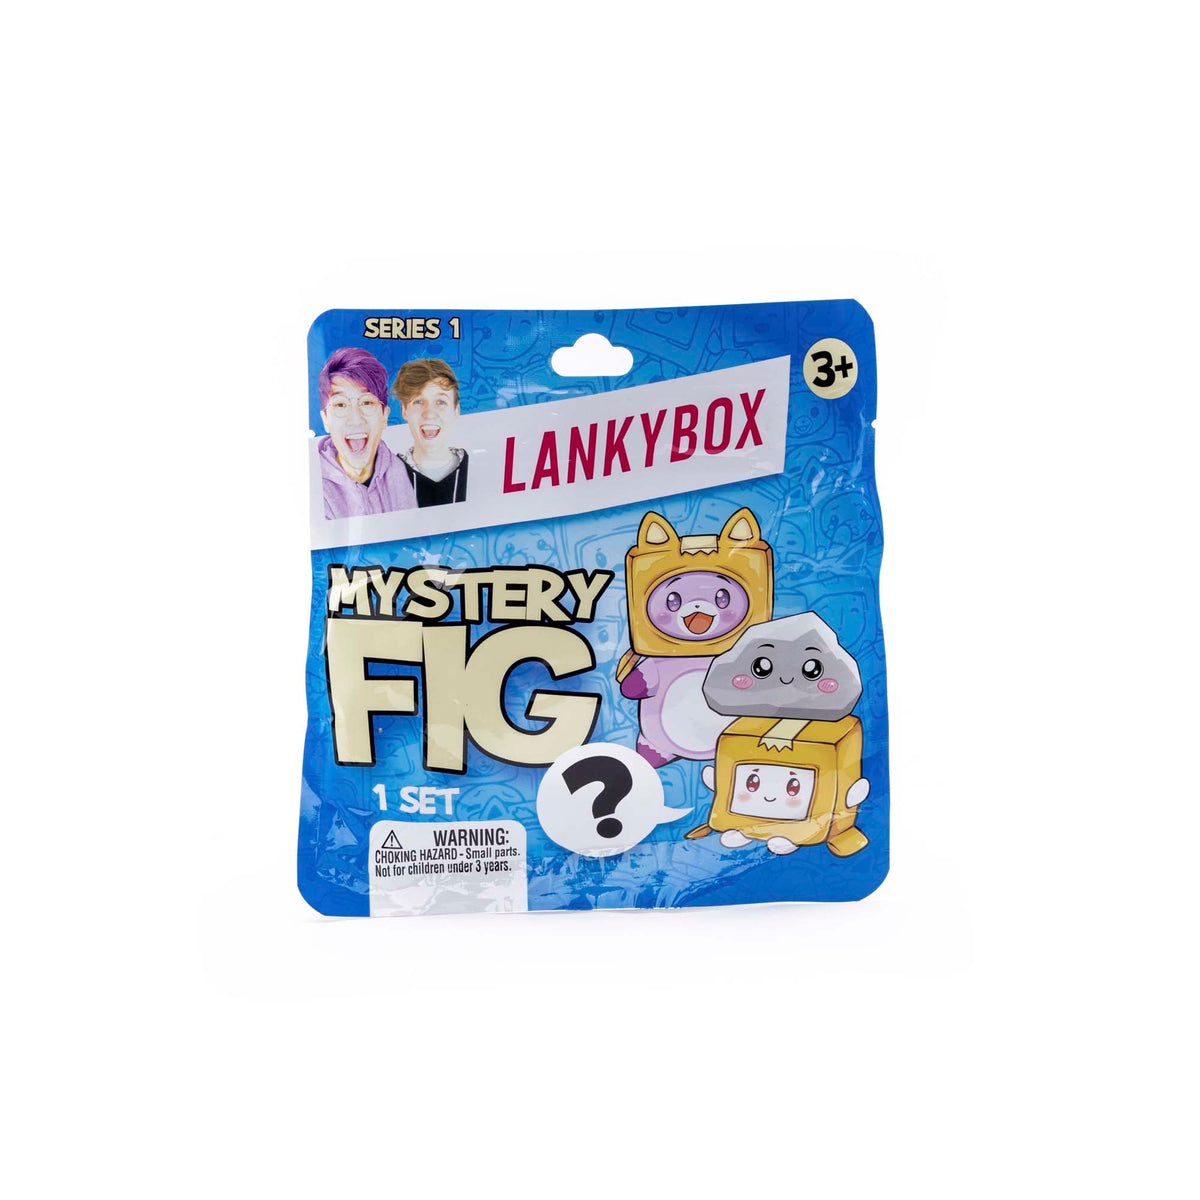 RED PLANET GROUP impulse buying Lanky Box Mystery Figure, Assortment, 1 Count